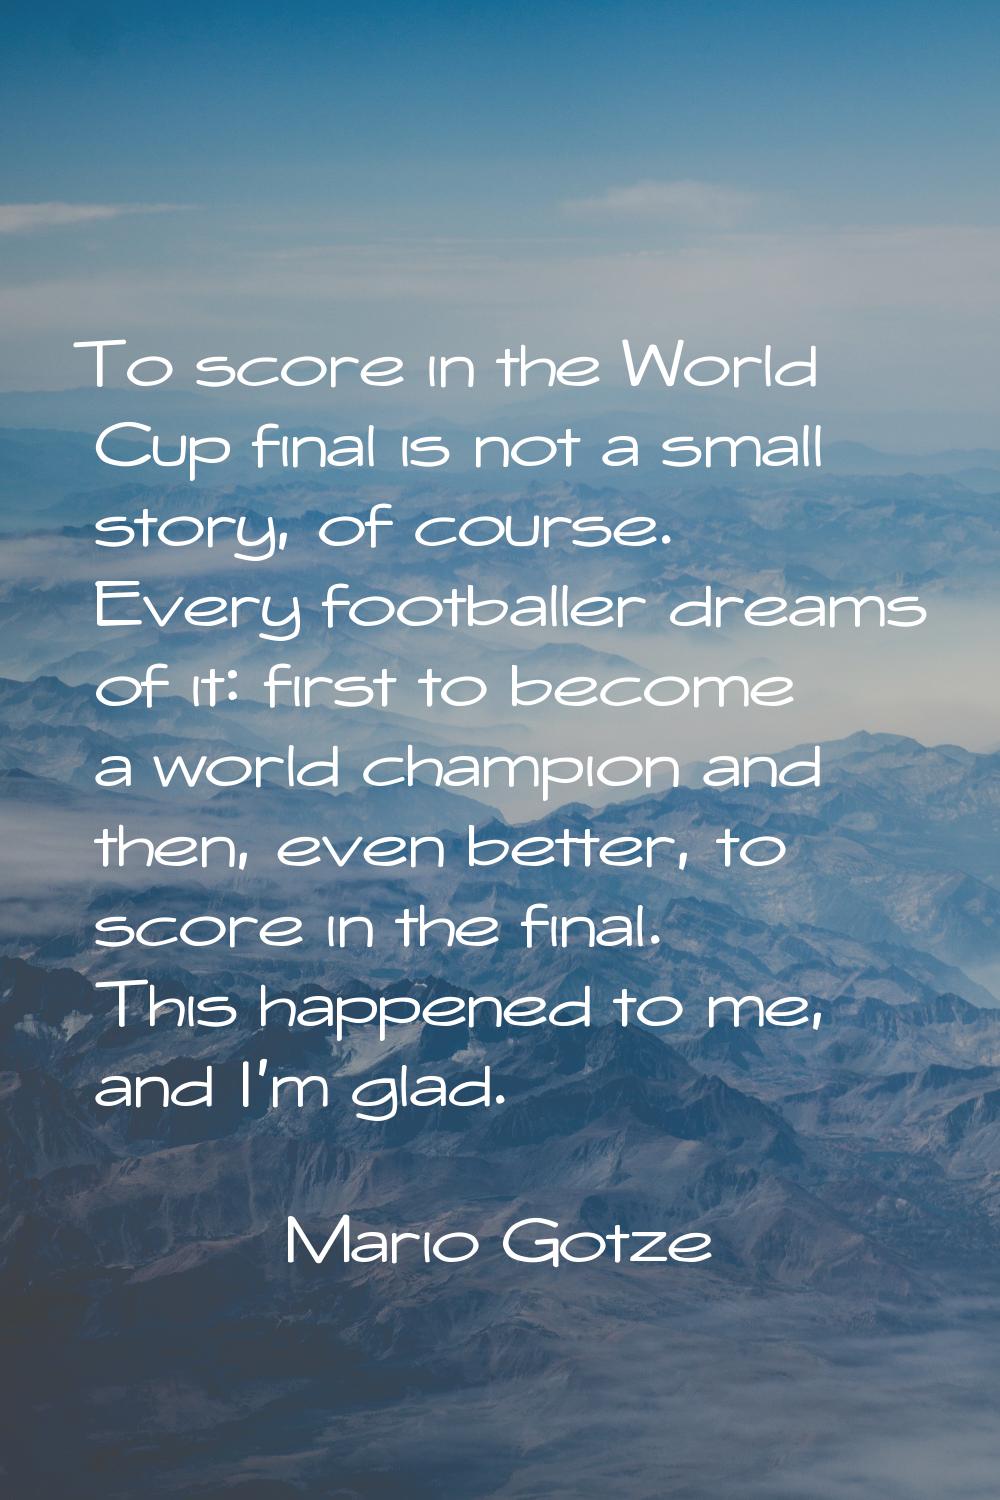 To score in the World Cup final is not a small story, of course. Every footballer dreams of it: fir